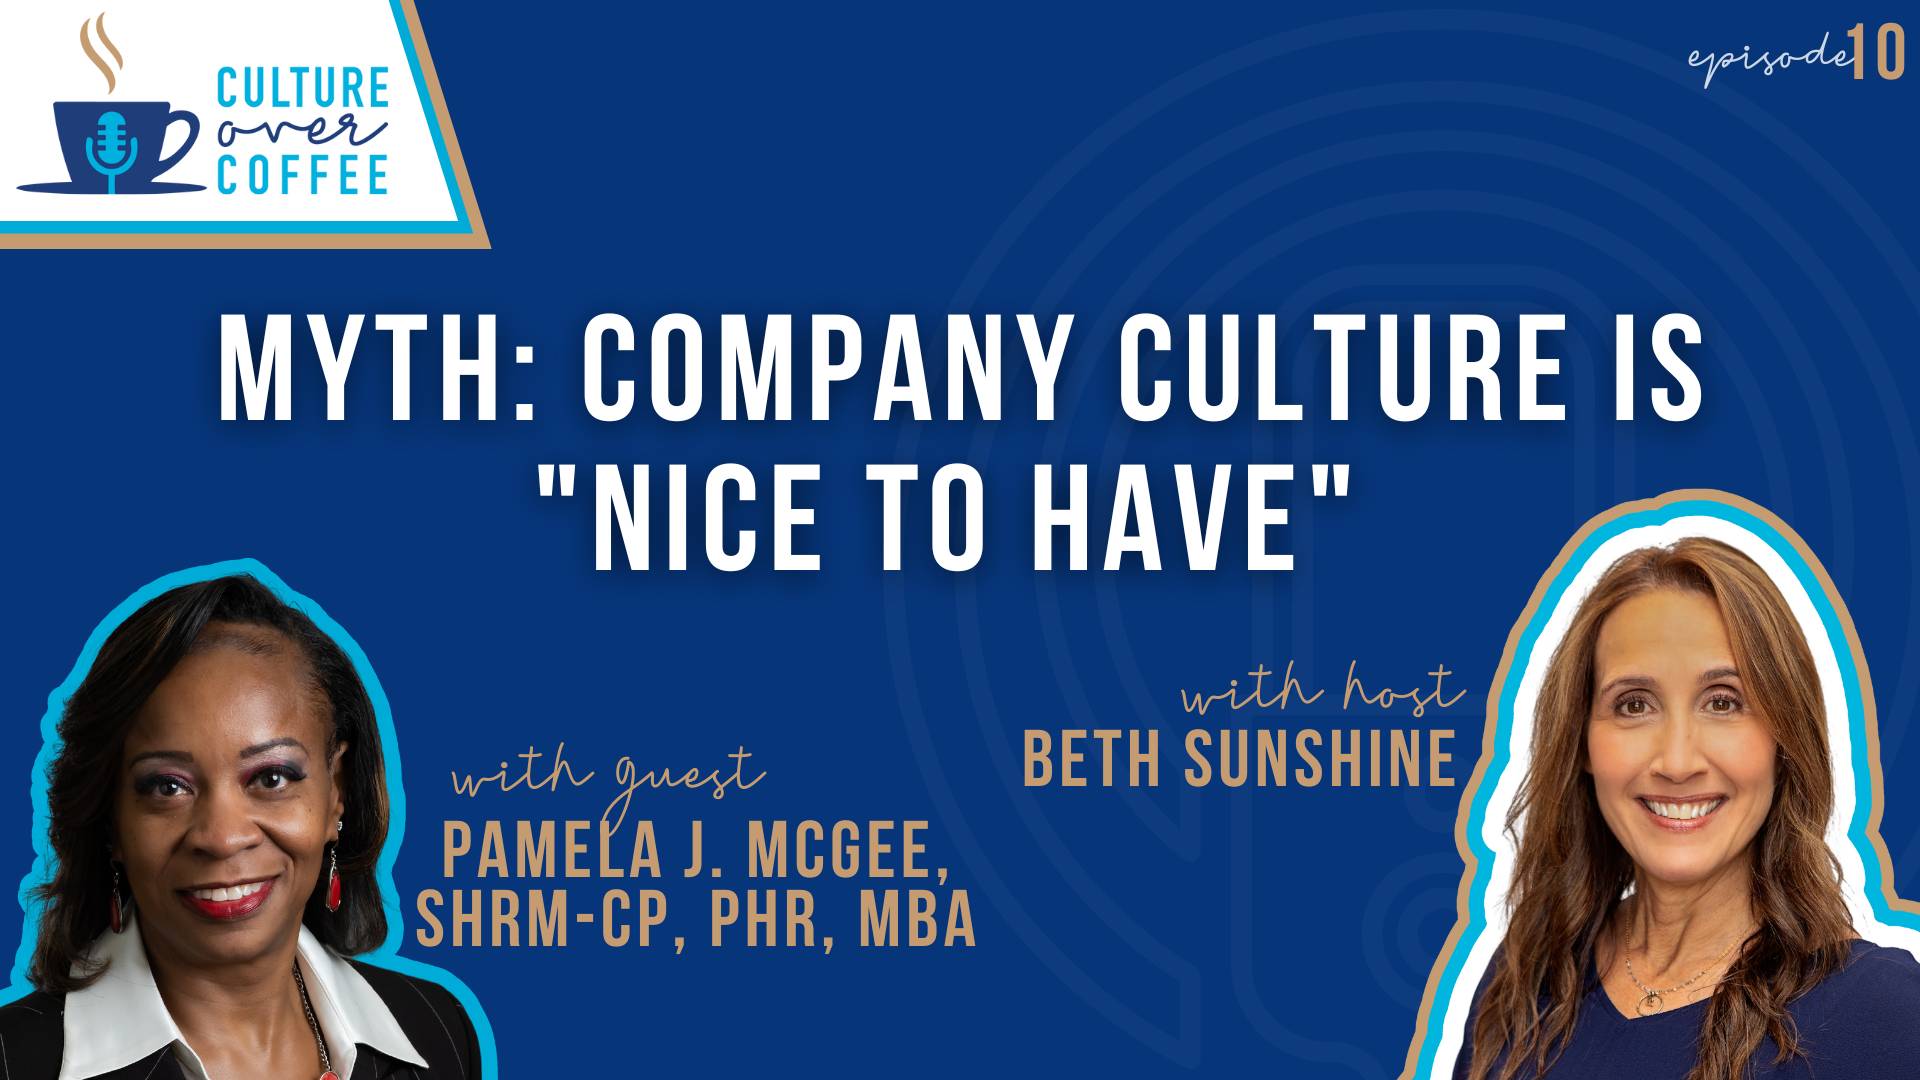 Culture Over Coffee Podcast | MYTH: Company Culture is “Nice to Have” with Pamela McGee, SHRM-CP, PHR, MBA.